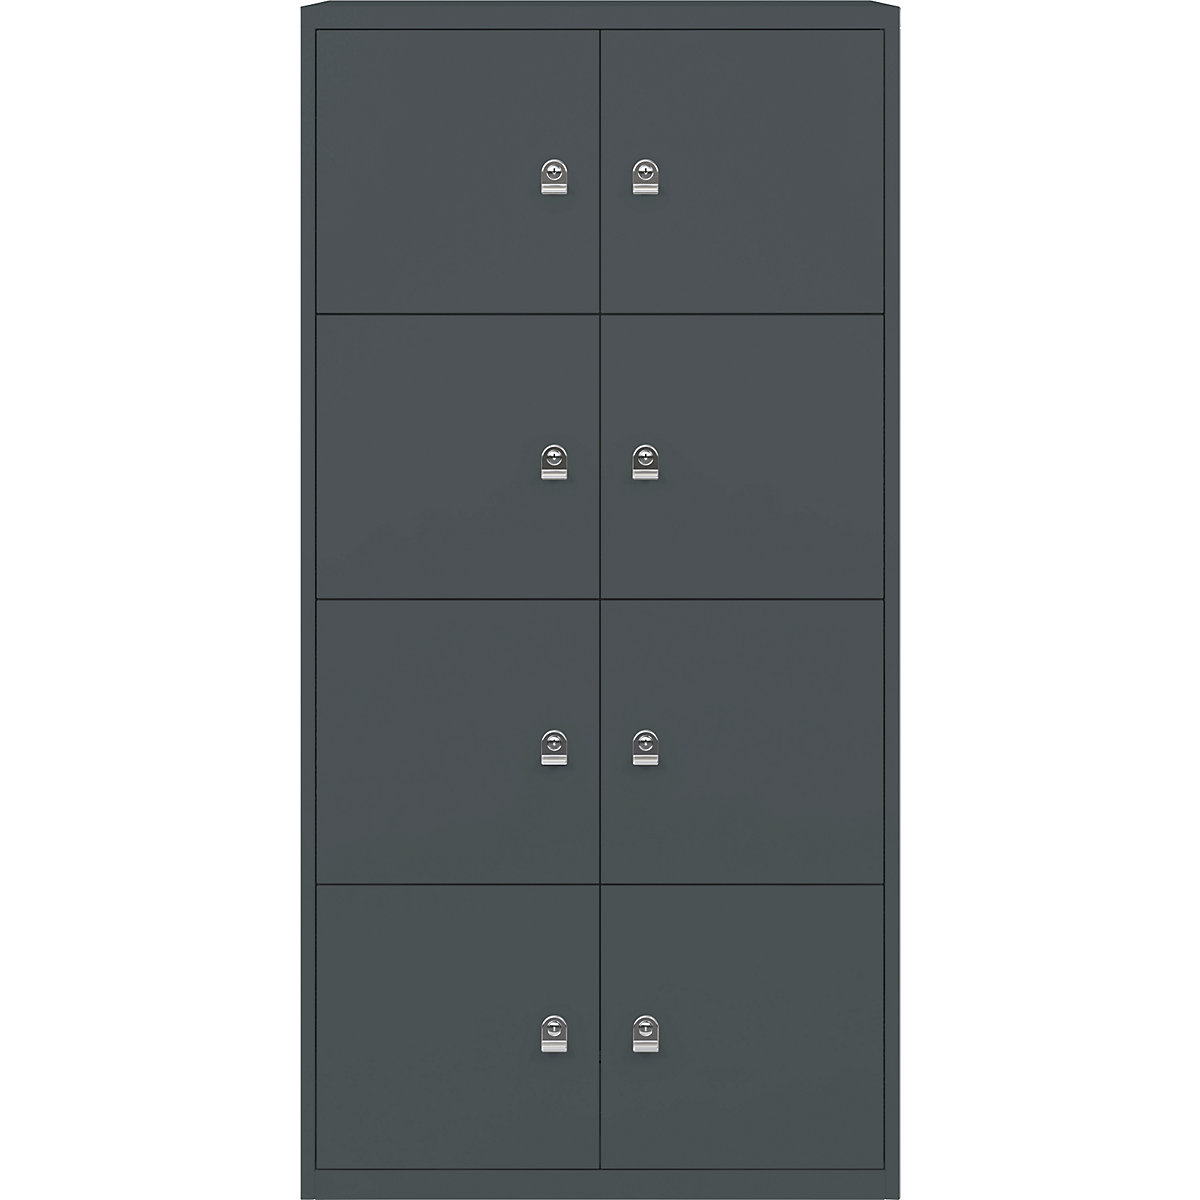 BISLEY – LateralFile™ lodge, with 8 lockable compartments, height 375 mm each, charcoal